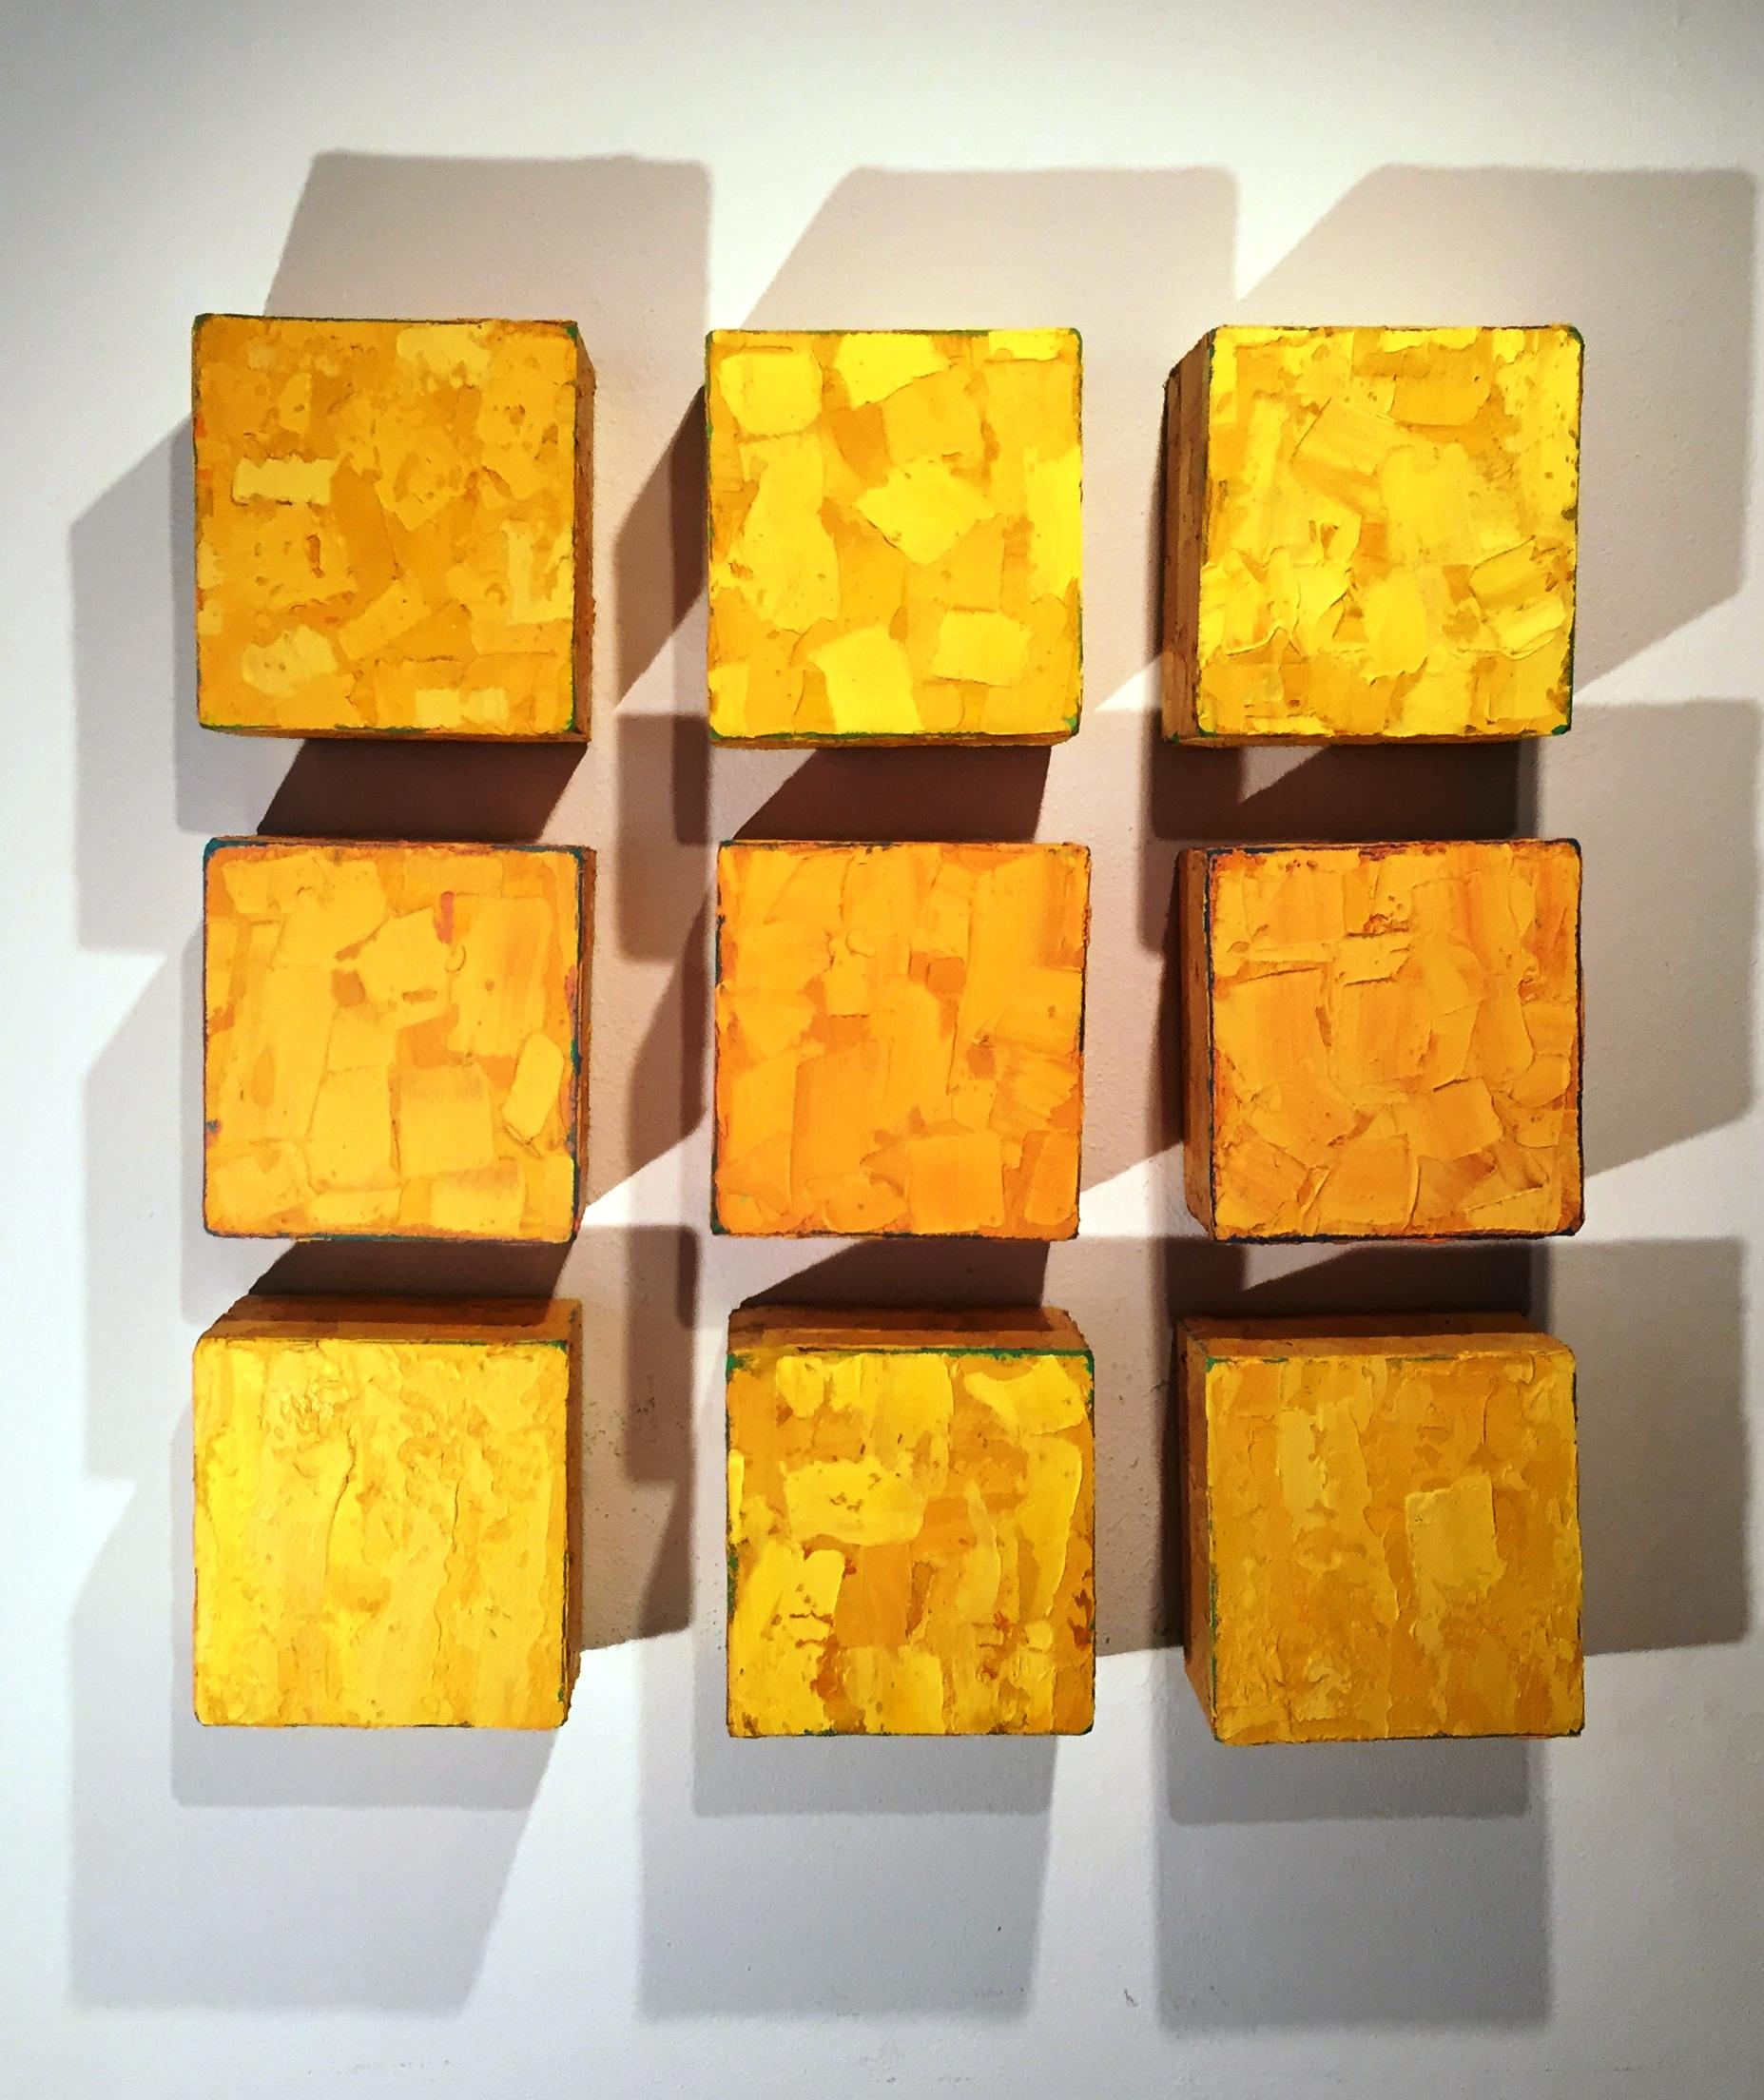 9 Boxes Installation Bright Yellow conceptual portrait of artist Clemens Briels - Painting by Rene Rietmeyer